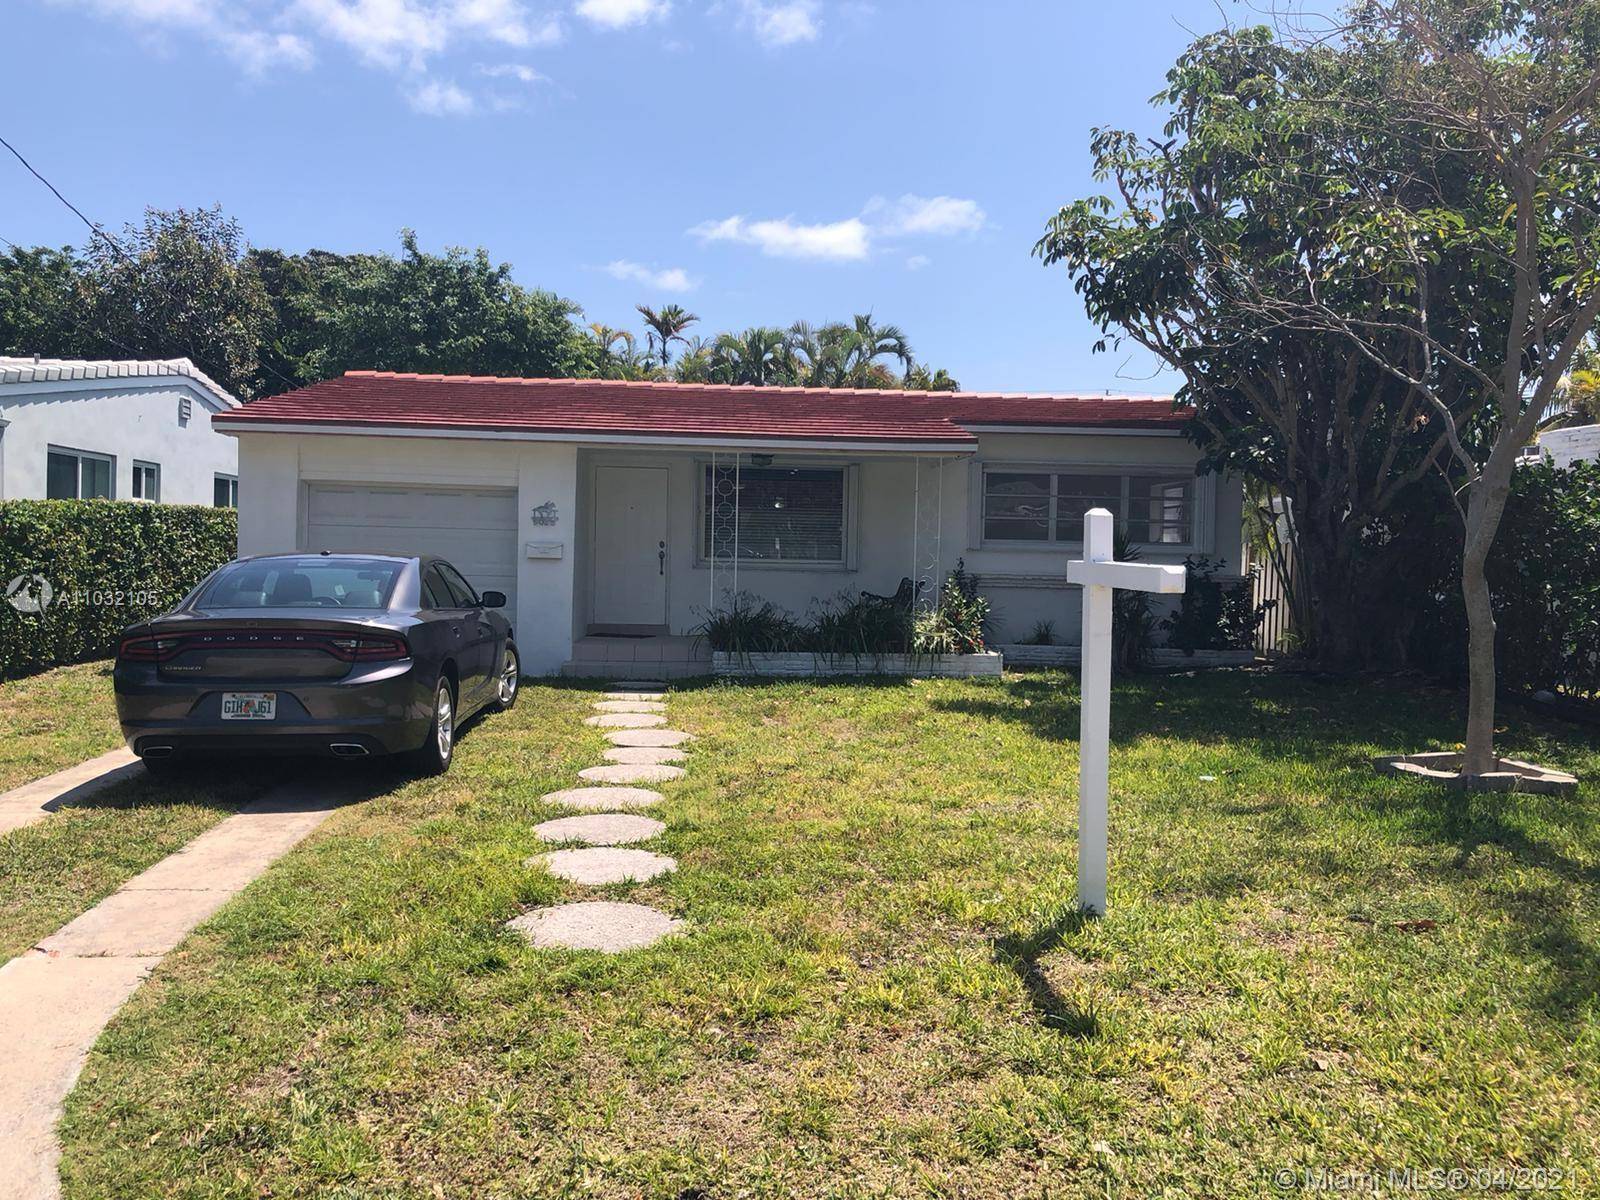 This property is located in beautiful Surfside, walking distance to beaches, restaurants, places of worship and Bal Harbor shops.